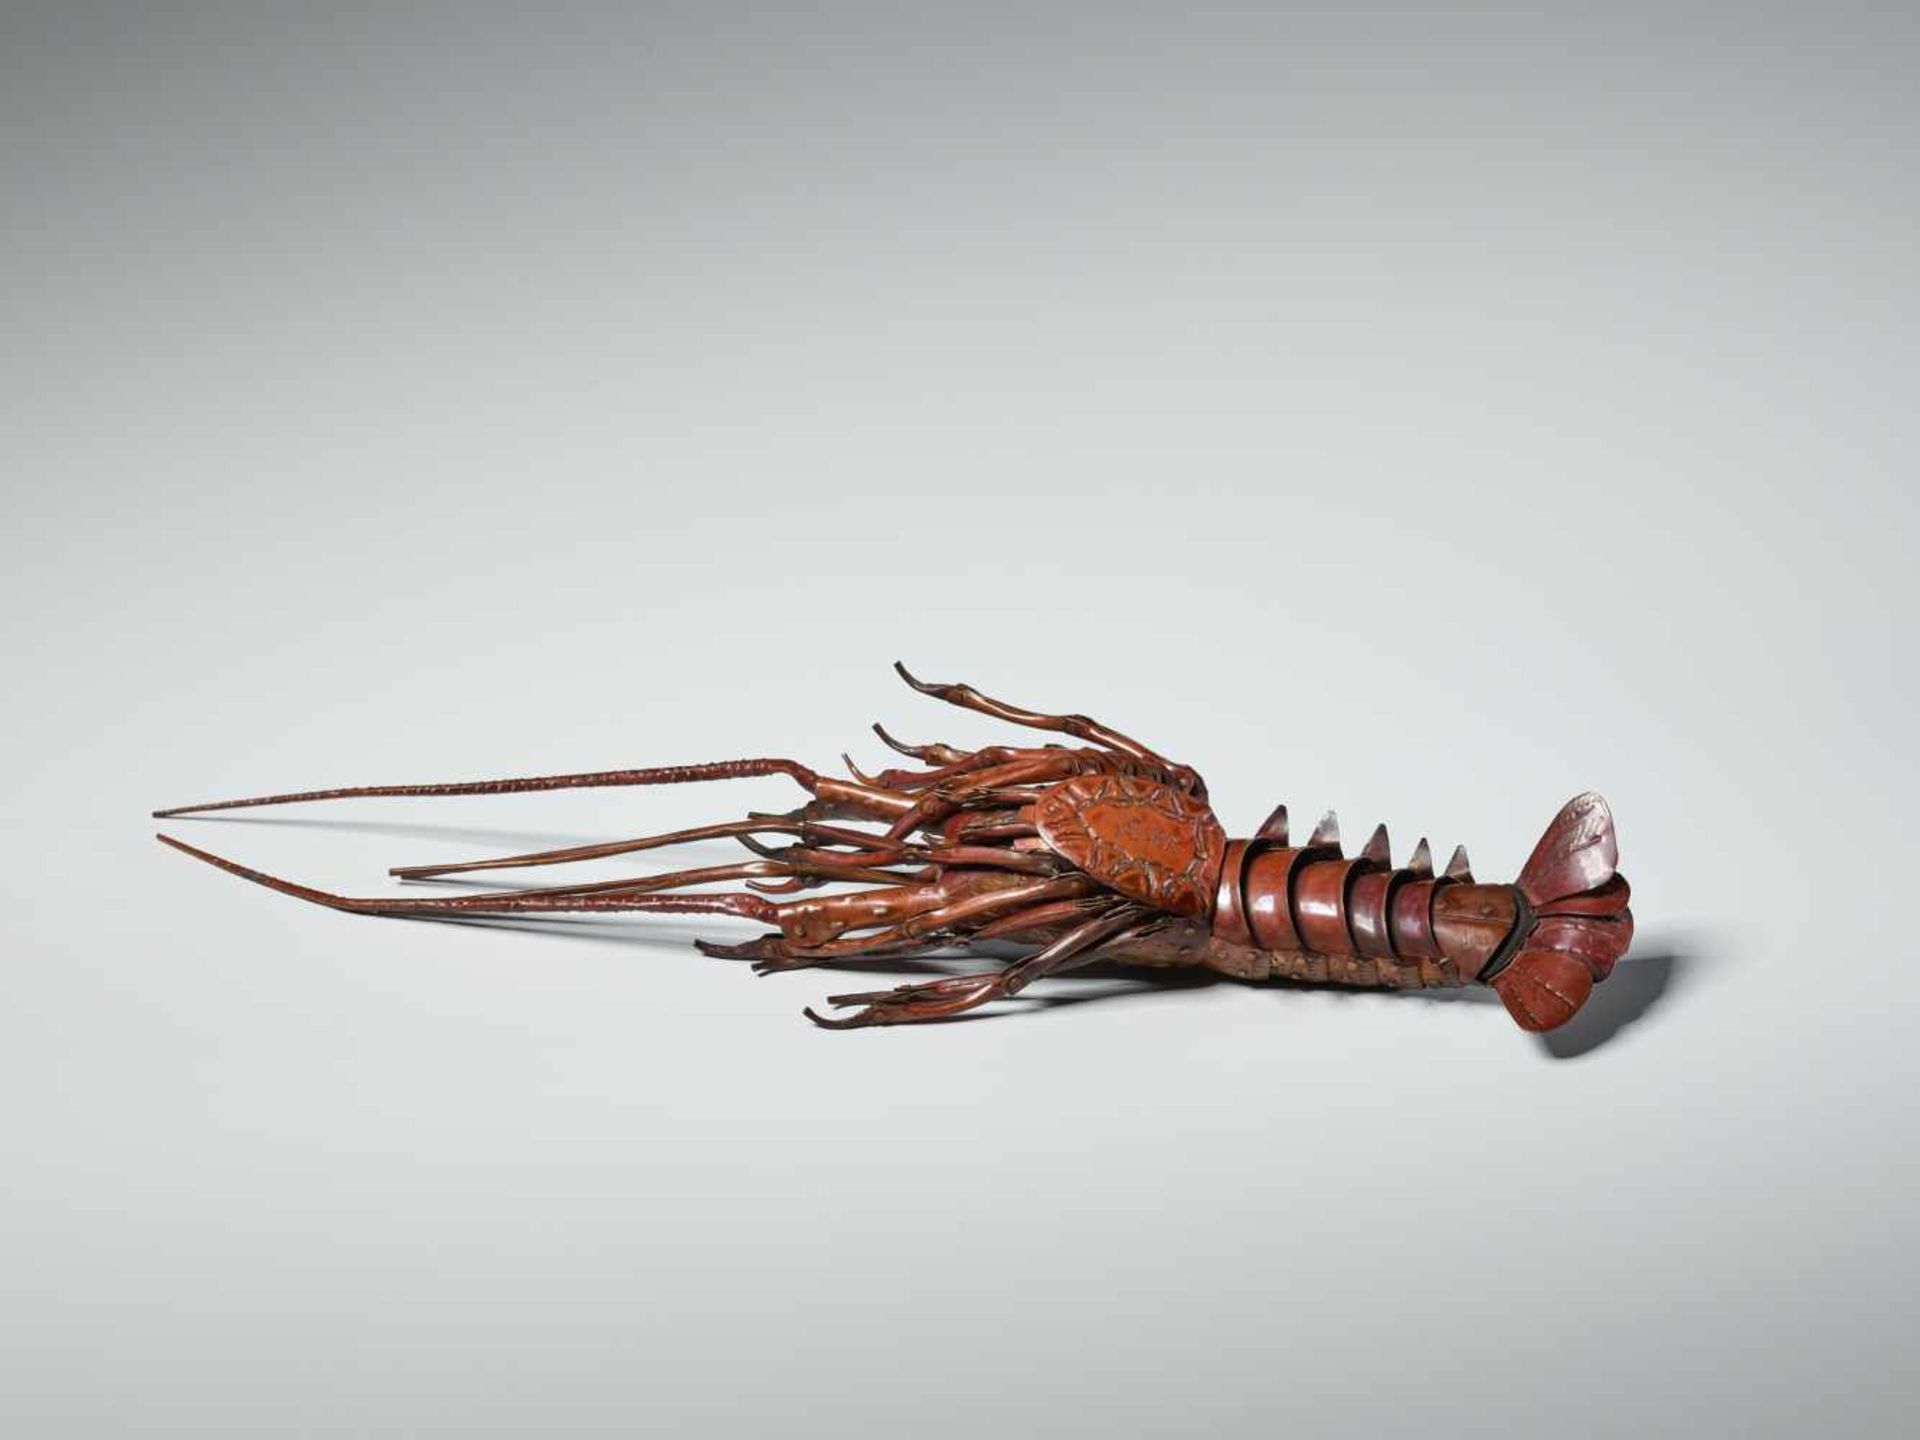 A PAIR OF FULLY ARTICULATED JIZAI OKIMONO DEPICTING EBI (SPINY LOBSTER) BY HIROYOSHICopperJapan, - Image 7 of 15